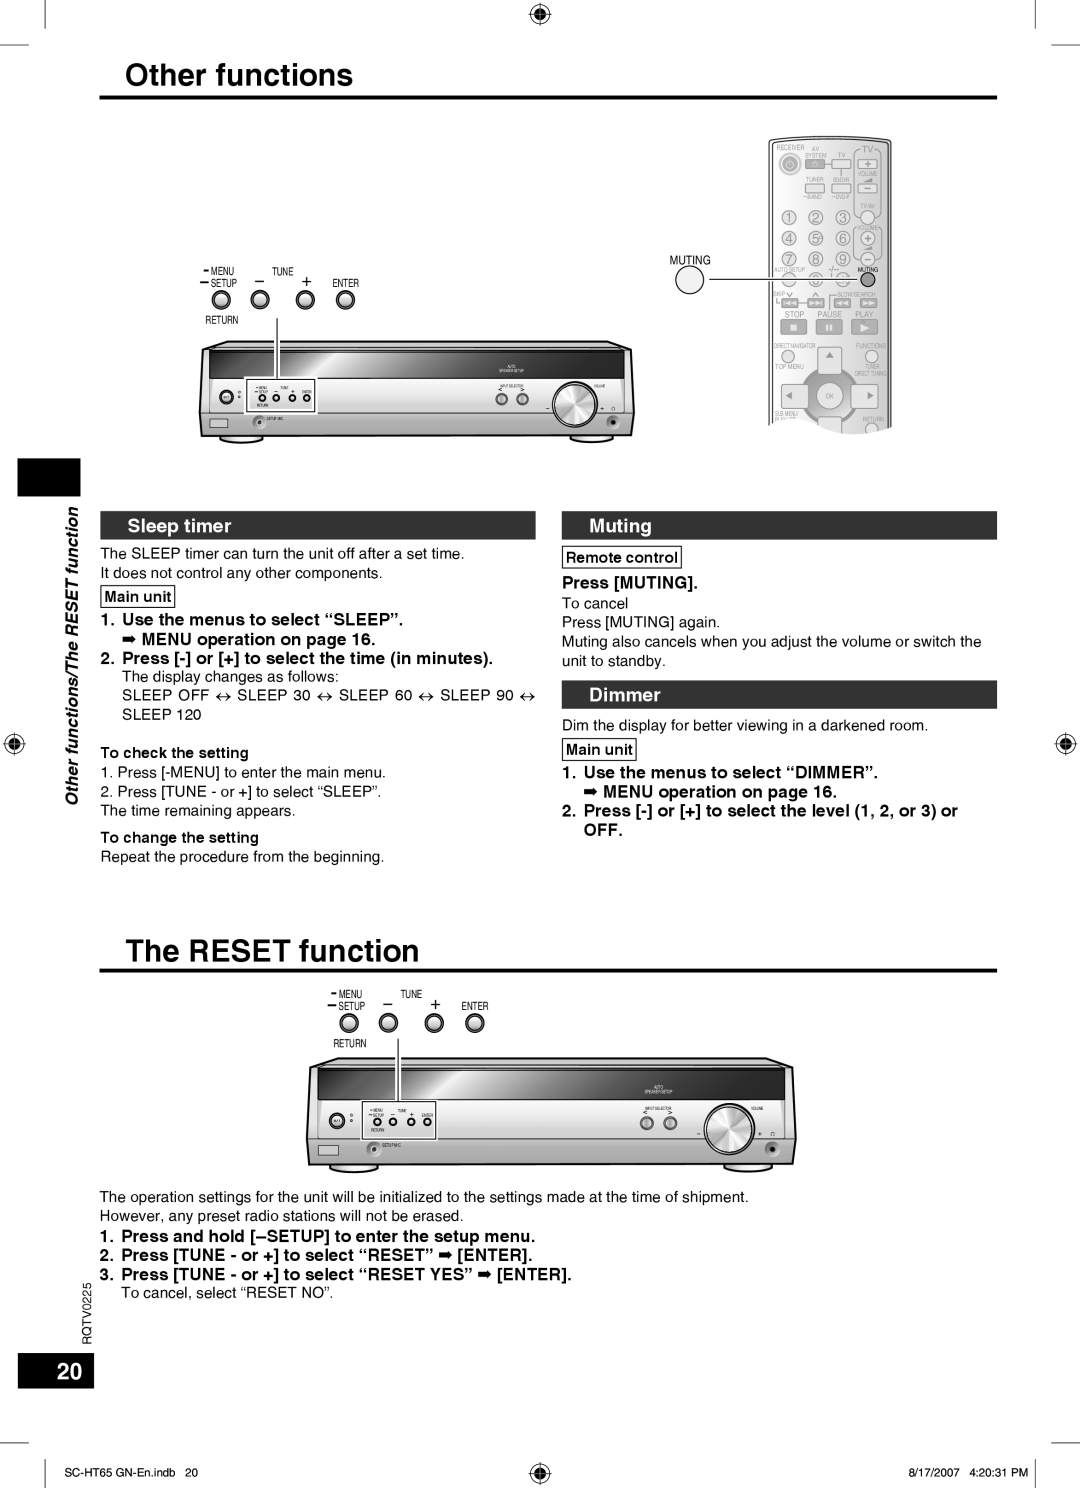 Panasonic SC-HT65 manual Sleep timer, Muting, Dimmer, Other functions/The RESET function, Press MUTING 